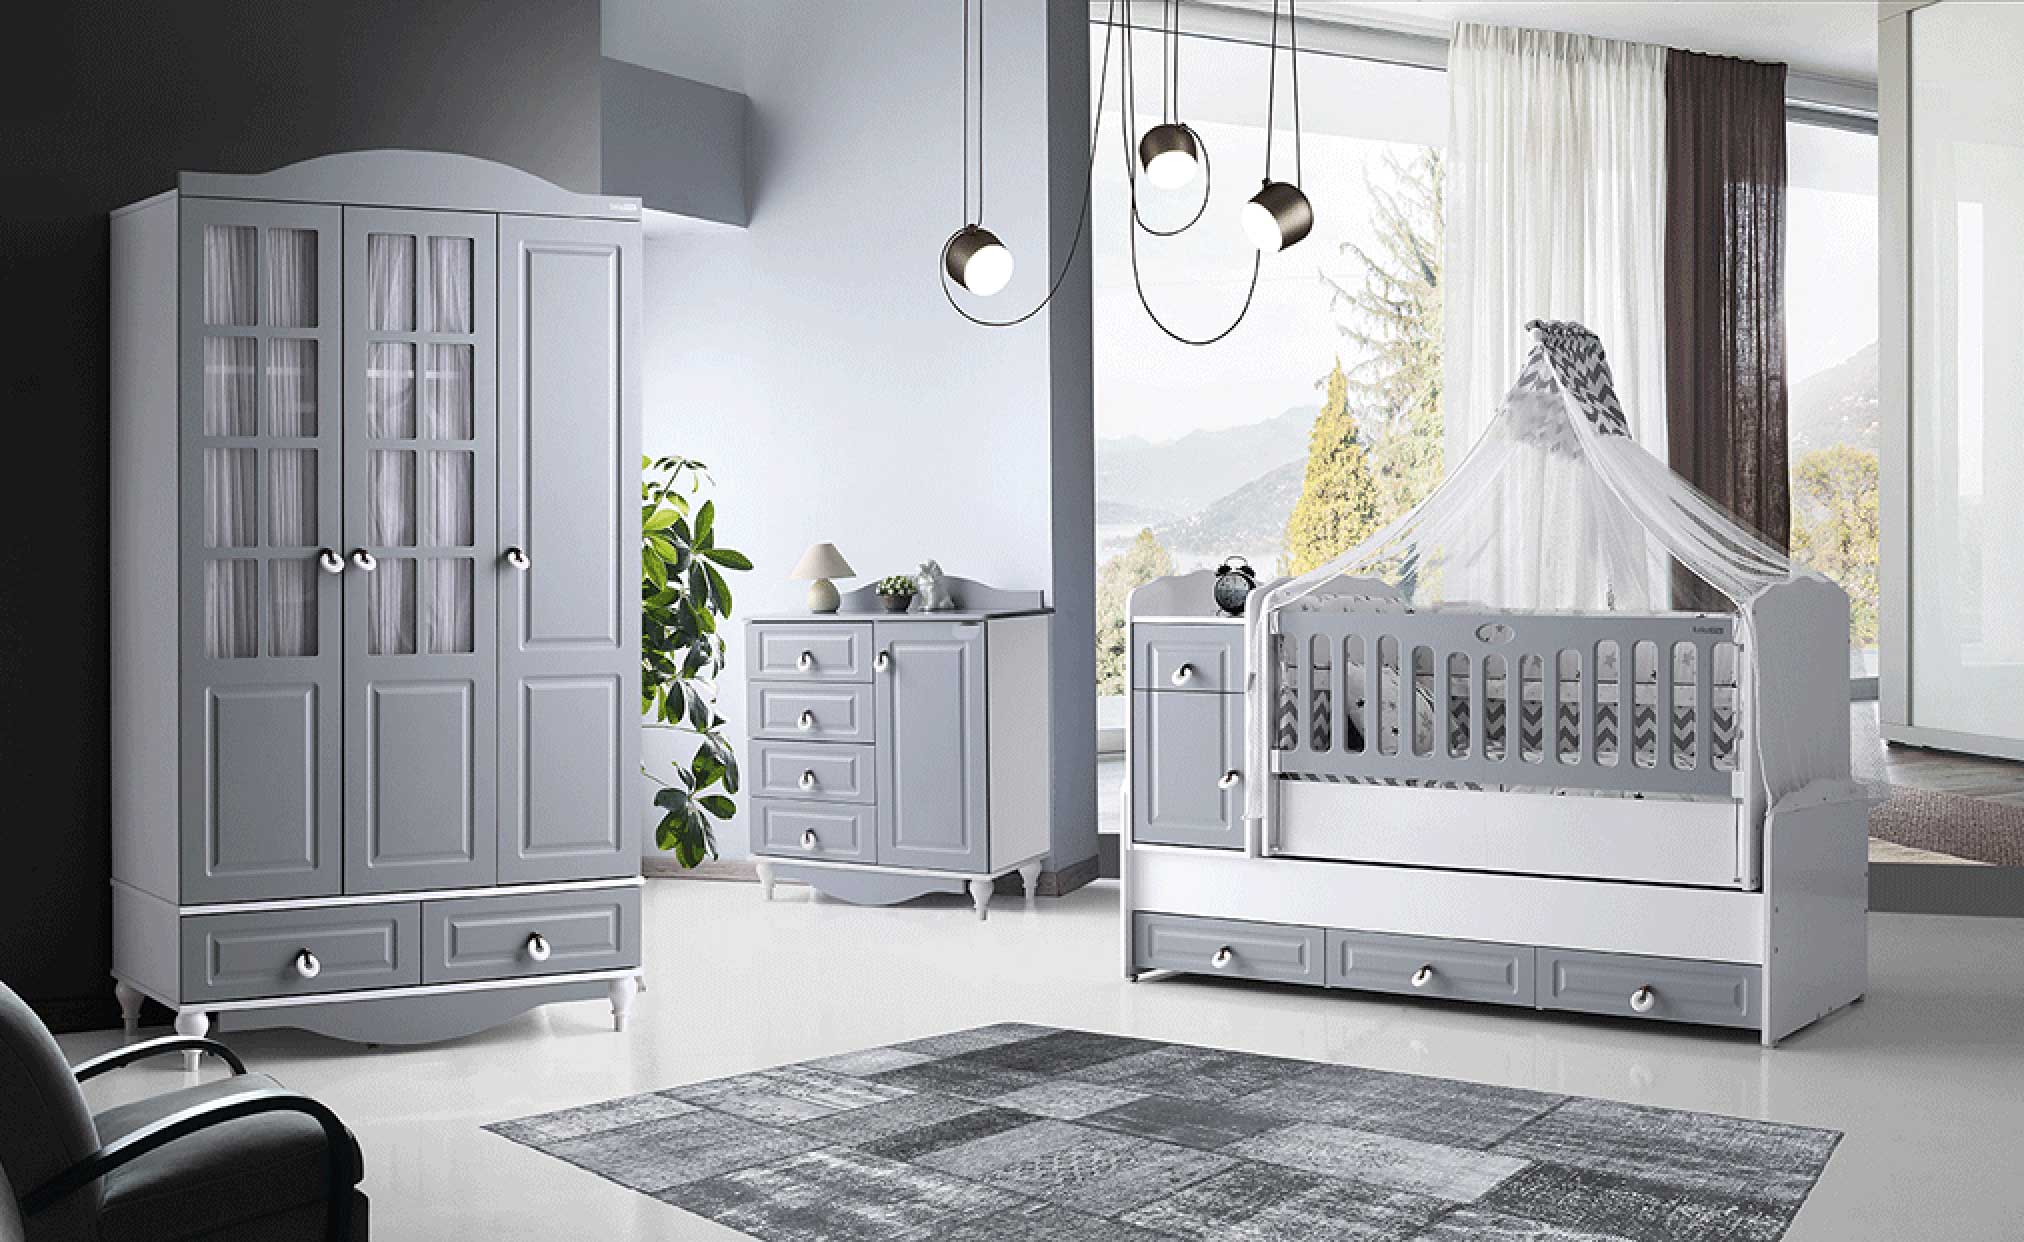  Baby Room Design Suggestions for Parents 